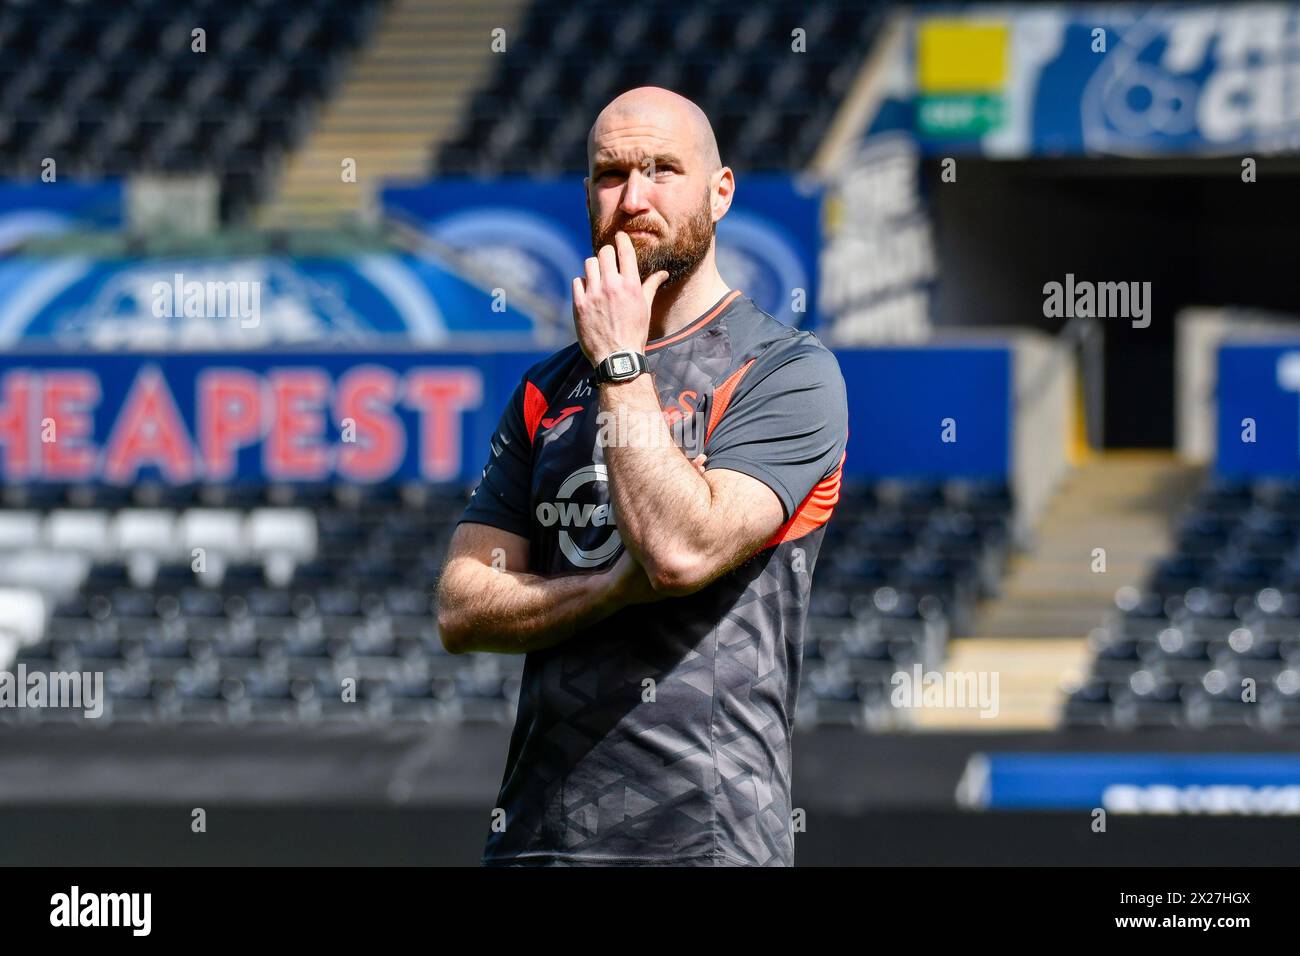 Swansea, Wales. 20 April 2024. Alun Andrews Swansea City Academy Physical Development Coach looks up to the stand at half time during the Under 21 Professional Development League match between Swansea City and Bristol City at the Swansea.com Stadium in Swansea, Wales, UK on 20 April 2024. Credit: Duncan Thomas/Majestic Media/Alamy Live News. Stock Photo